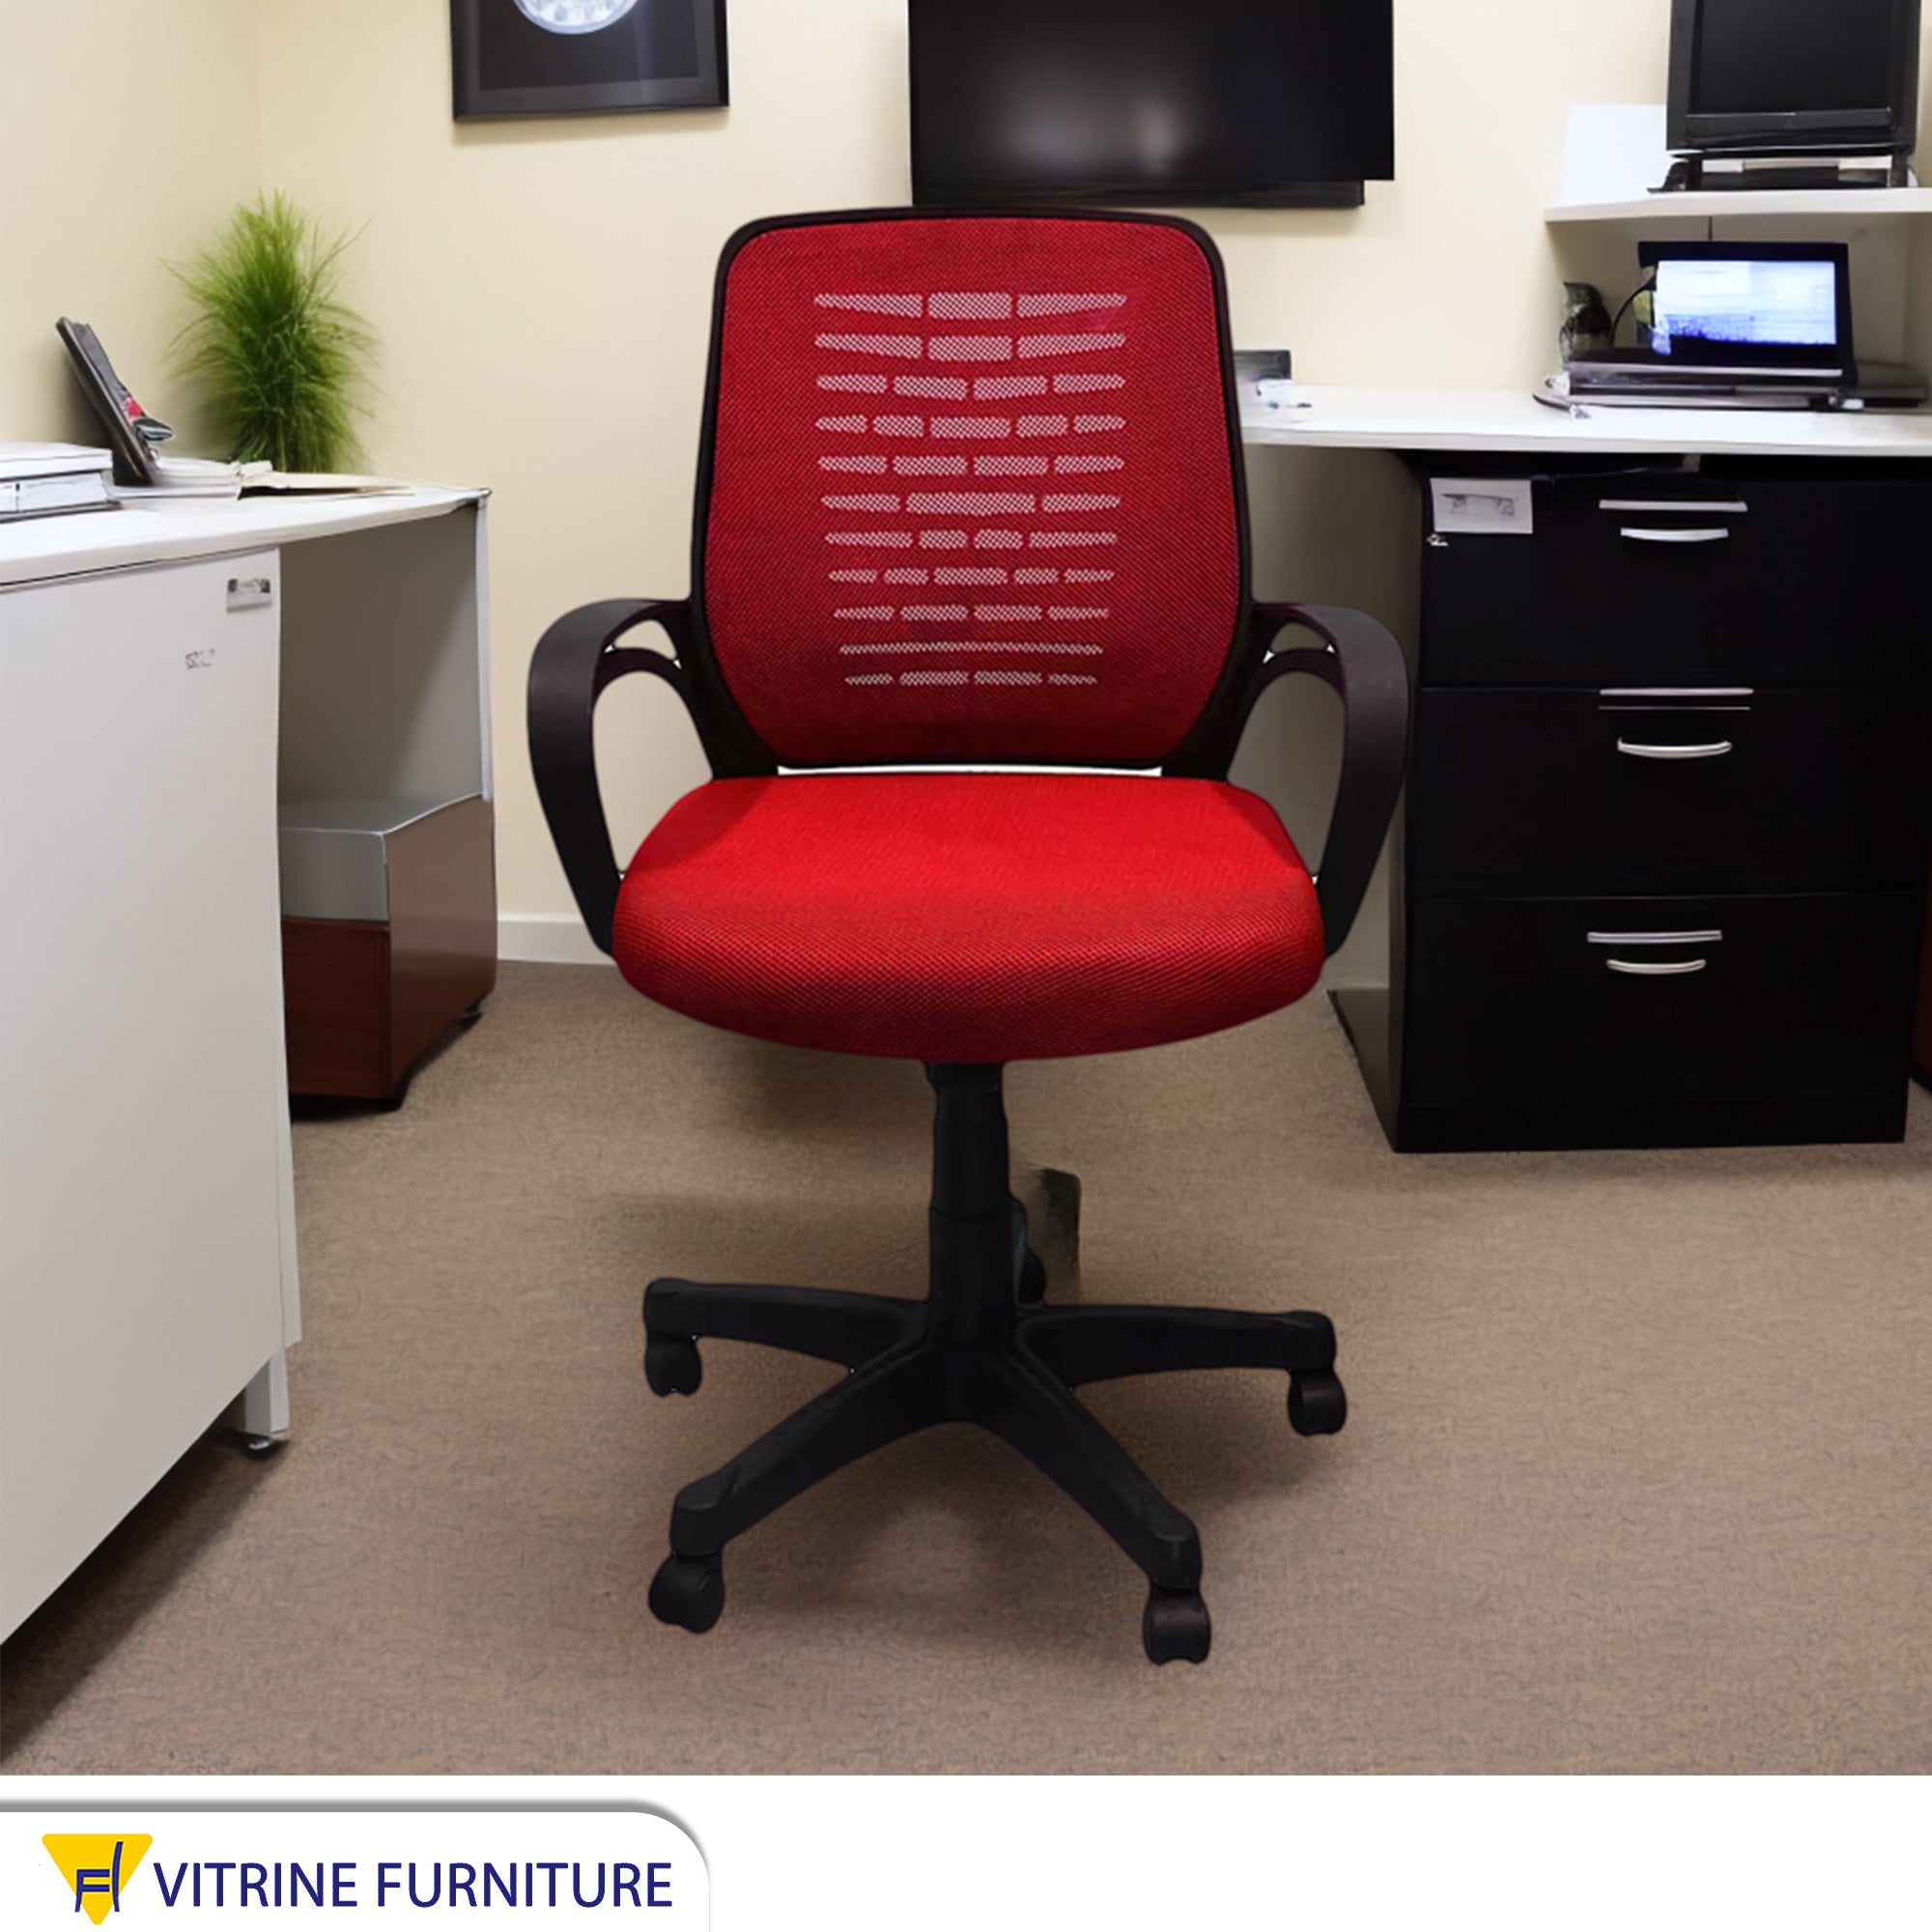 Red office chair